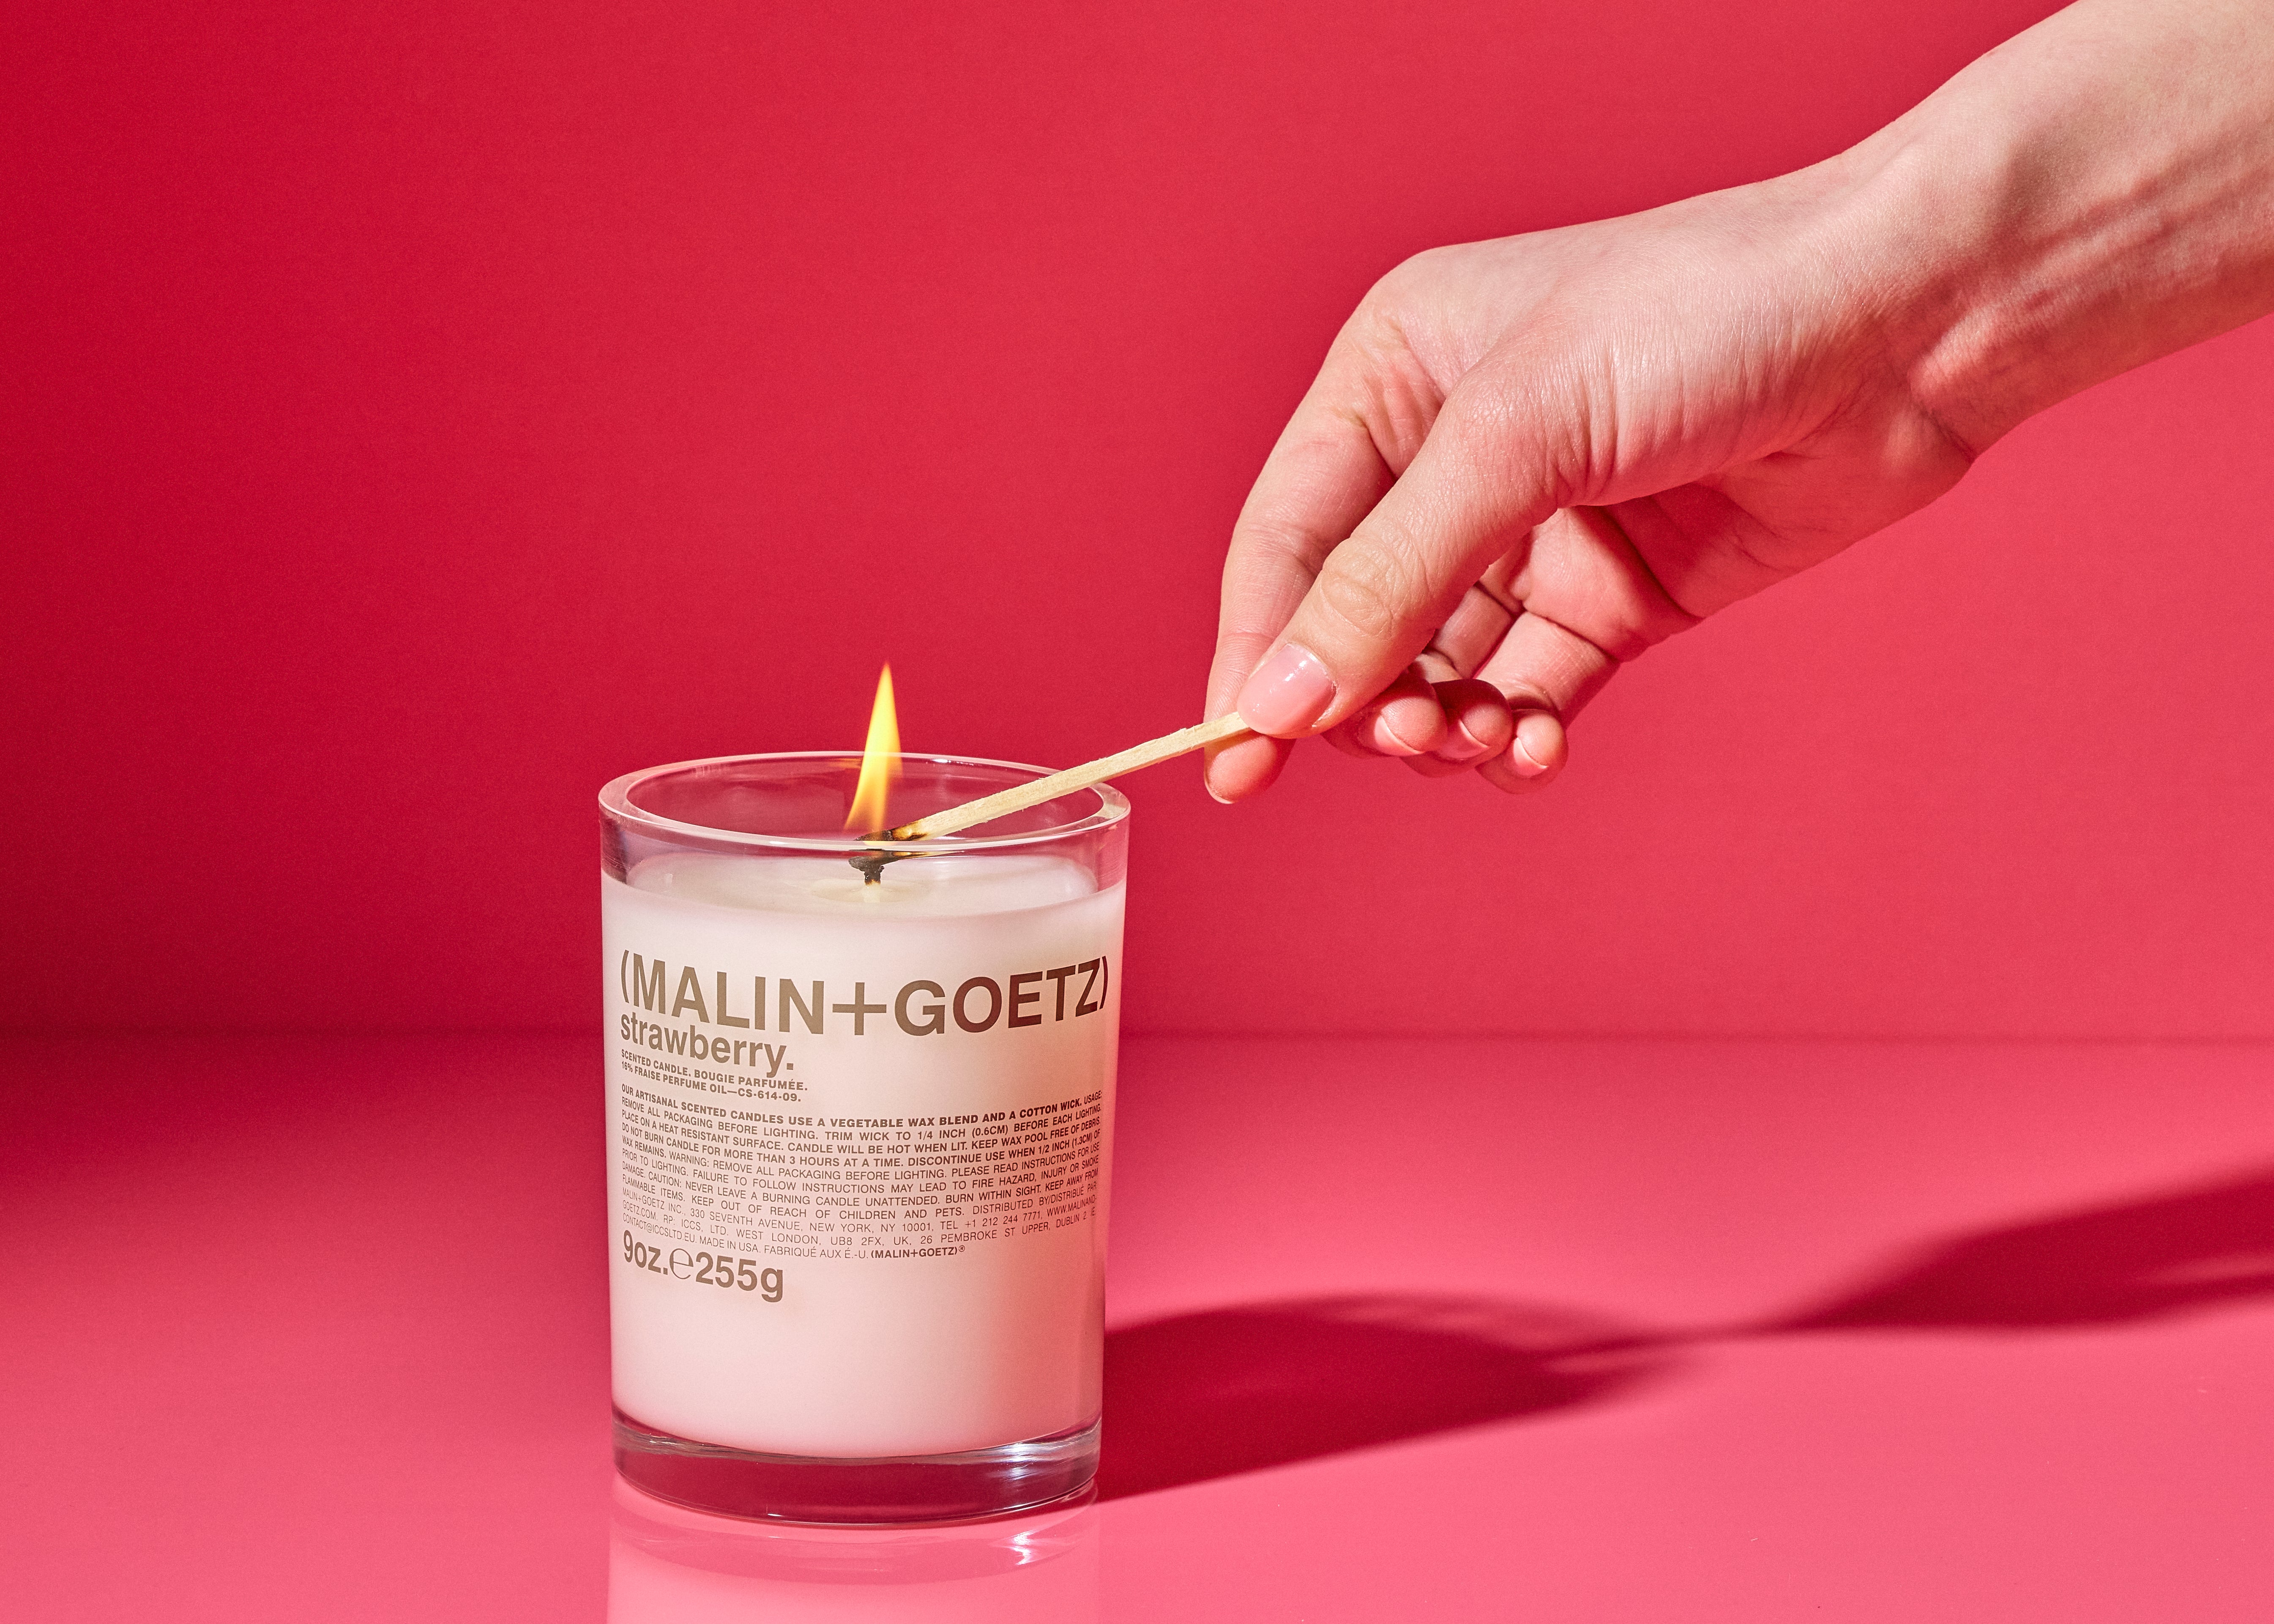 Malin and Goetz’s Strawberry candle will leave you ‘addicted to breathing’